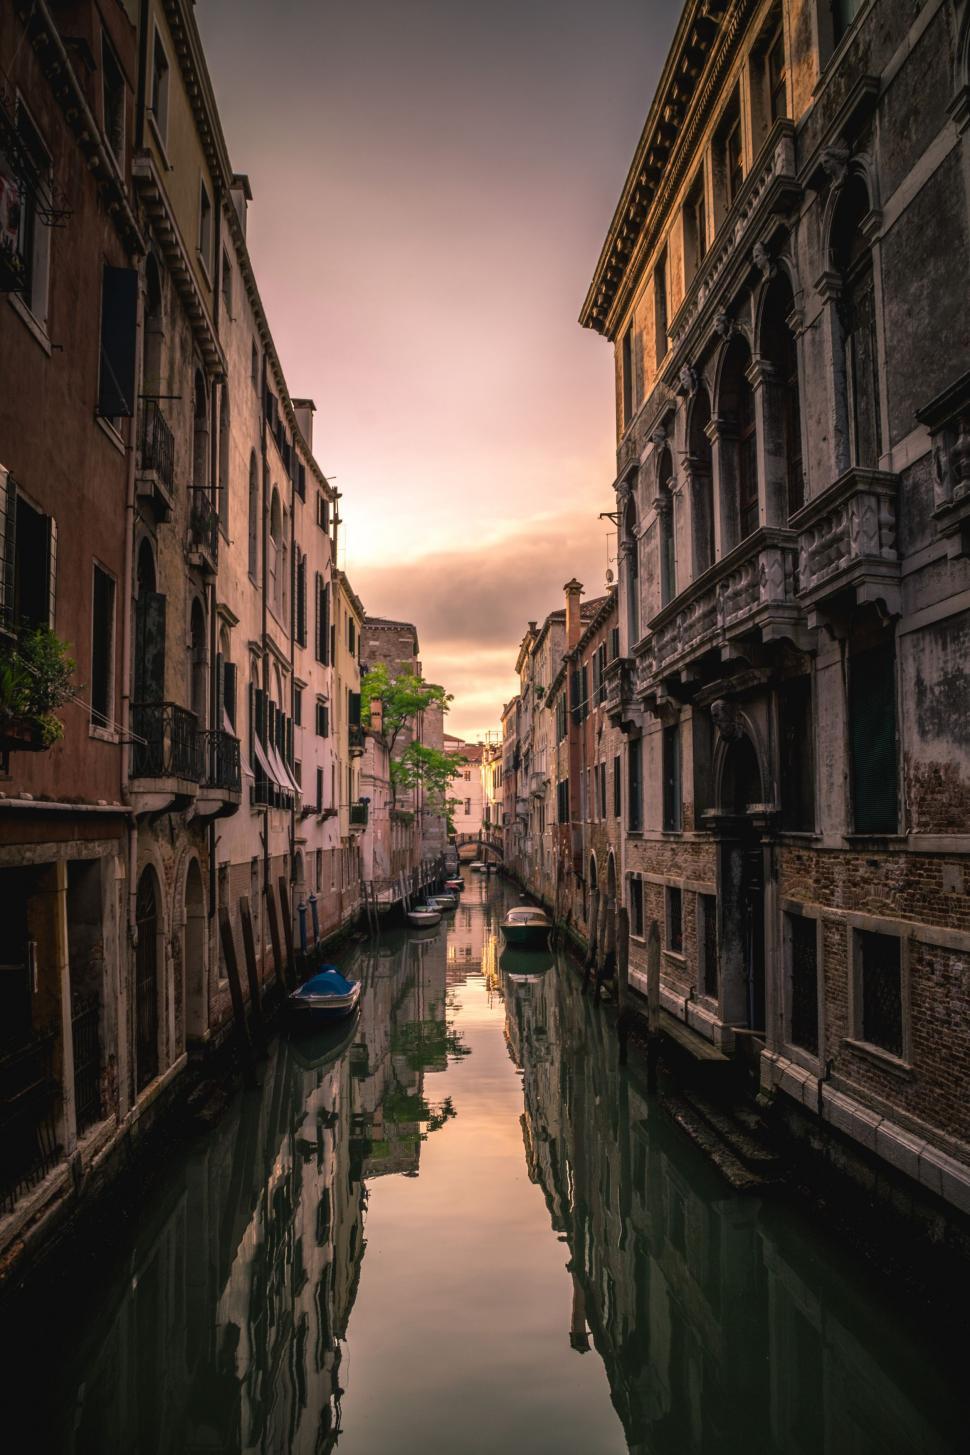 Free Image of Narrow Canal Between Two Buildings 